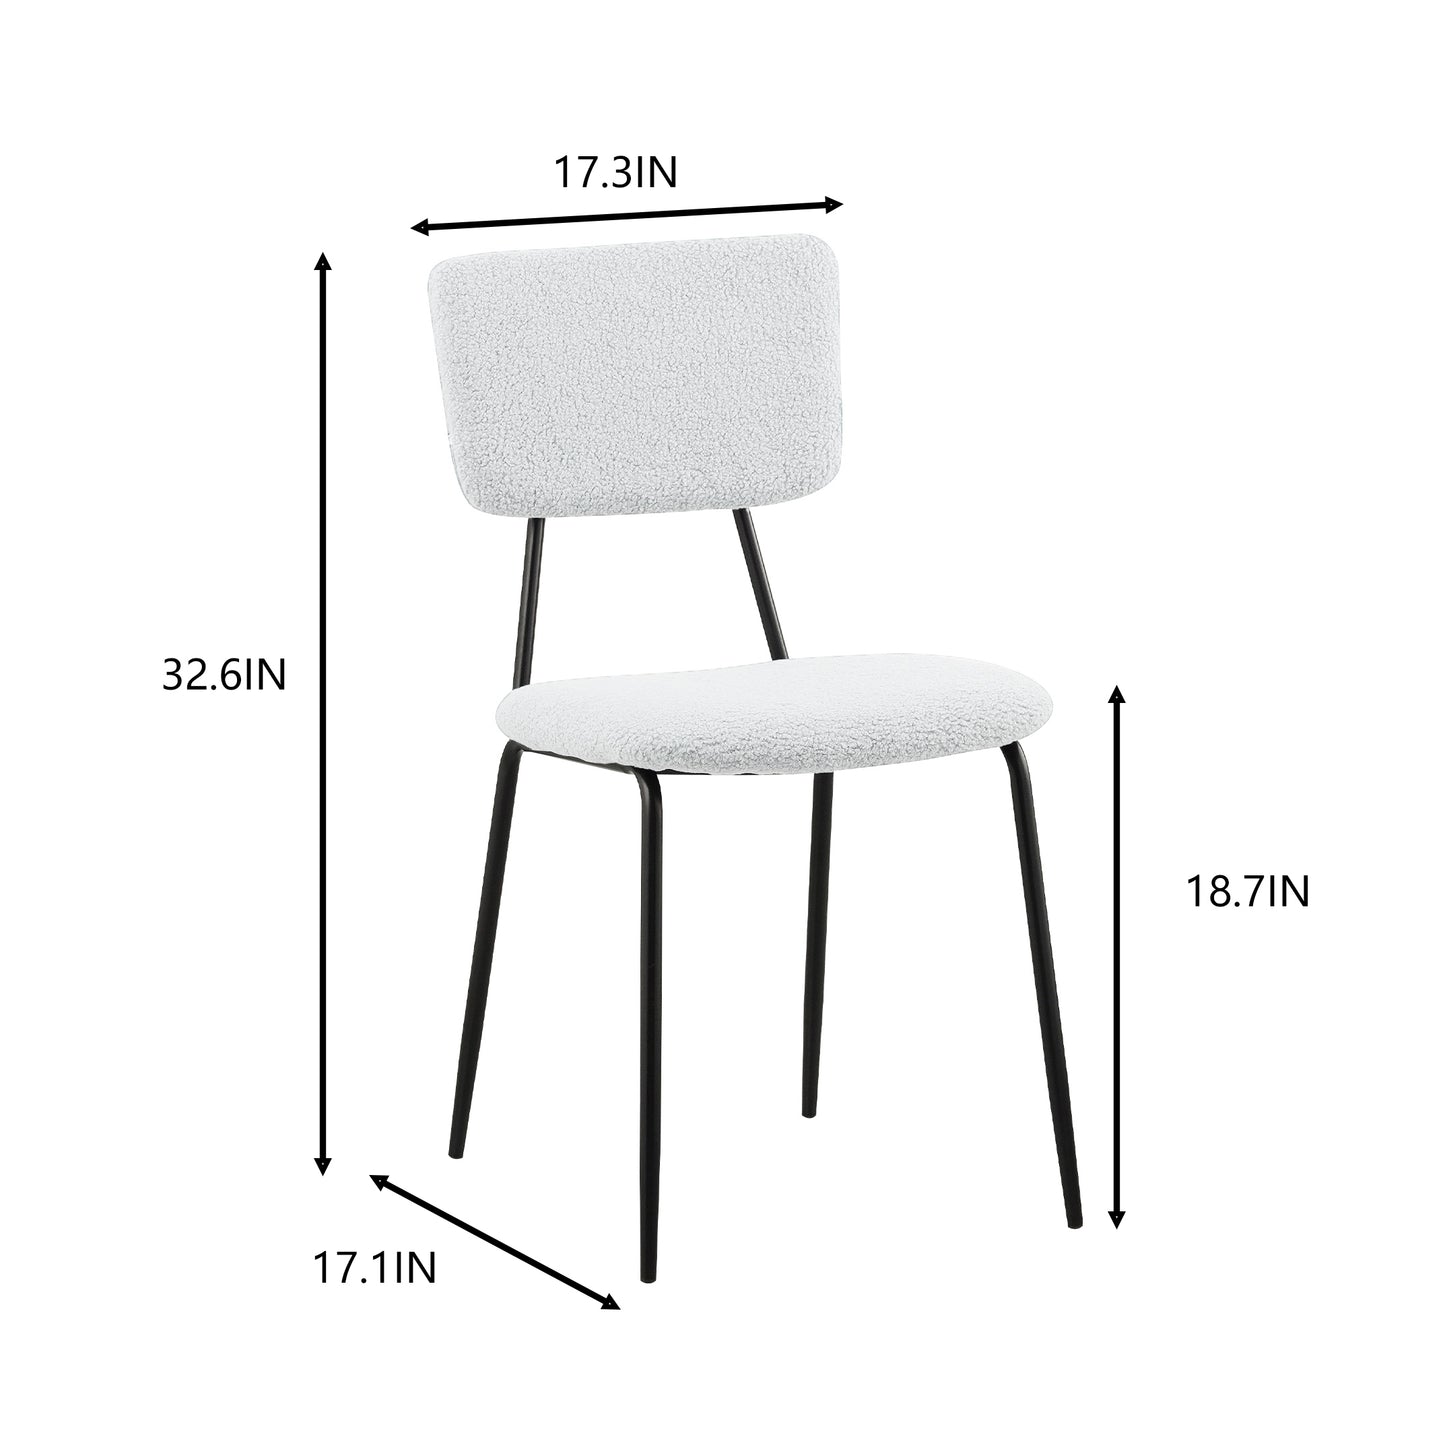 Dining Room Chairs Set of 4, Modern Comfortable Feature Chairs with Faux Plush Upholstered Back and Chrome Legs, Kitchen Side Chairs for Indoor Use: Home, Apartment (4 White Chairs)